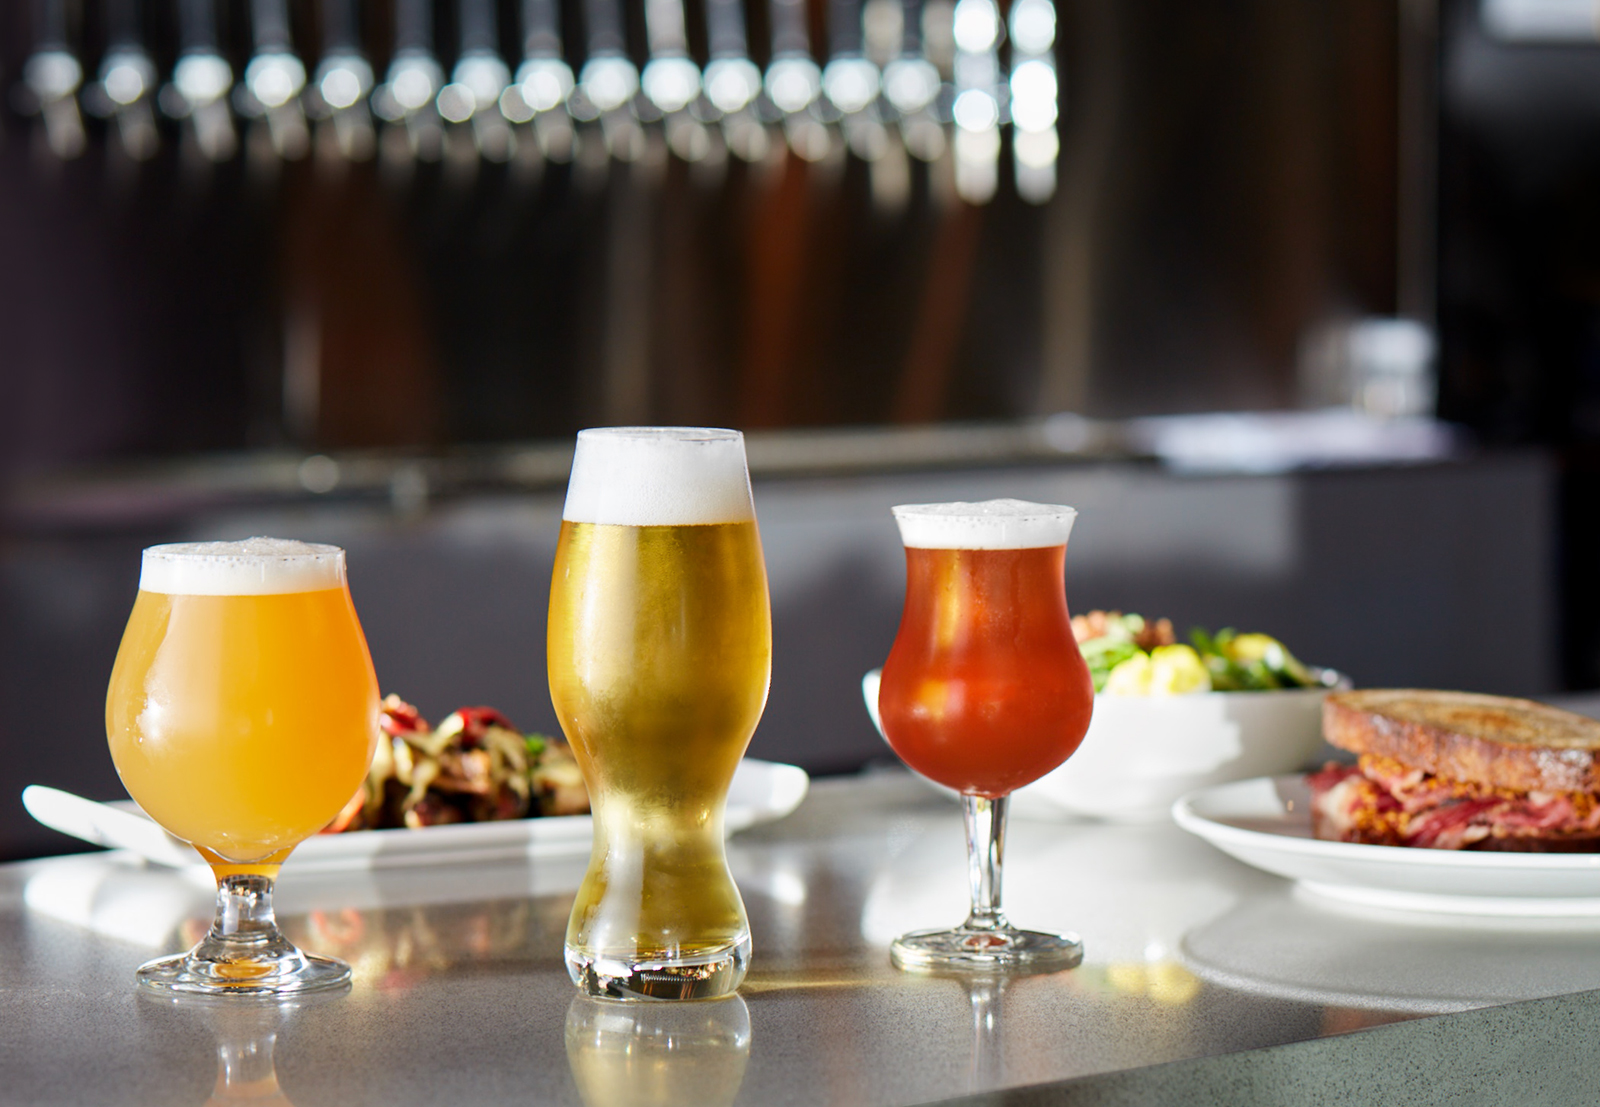 Restaurant Food Photography on Bar with Beer E Commerce Dallas Texas